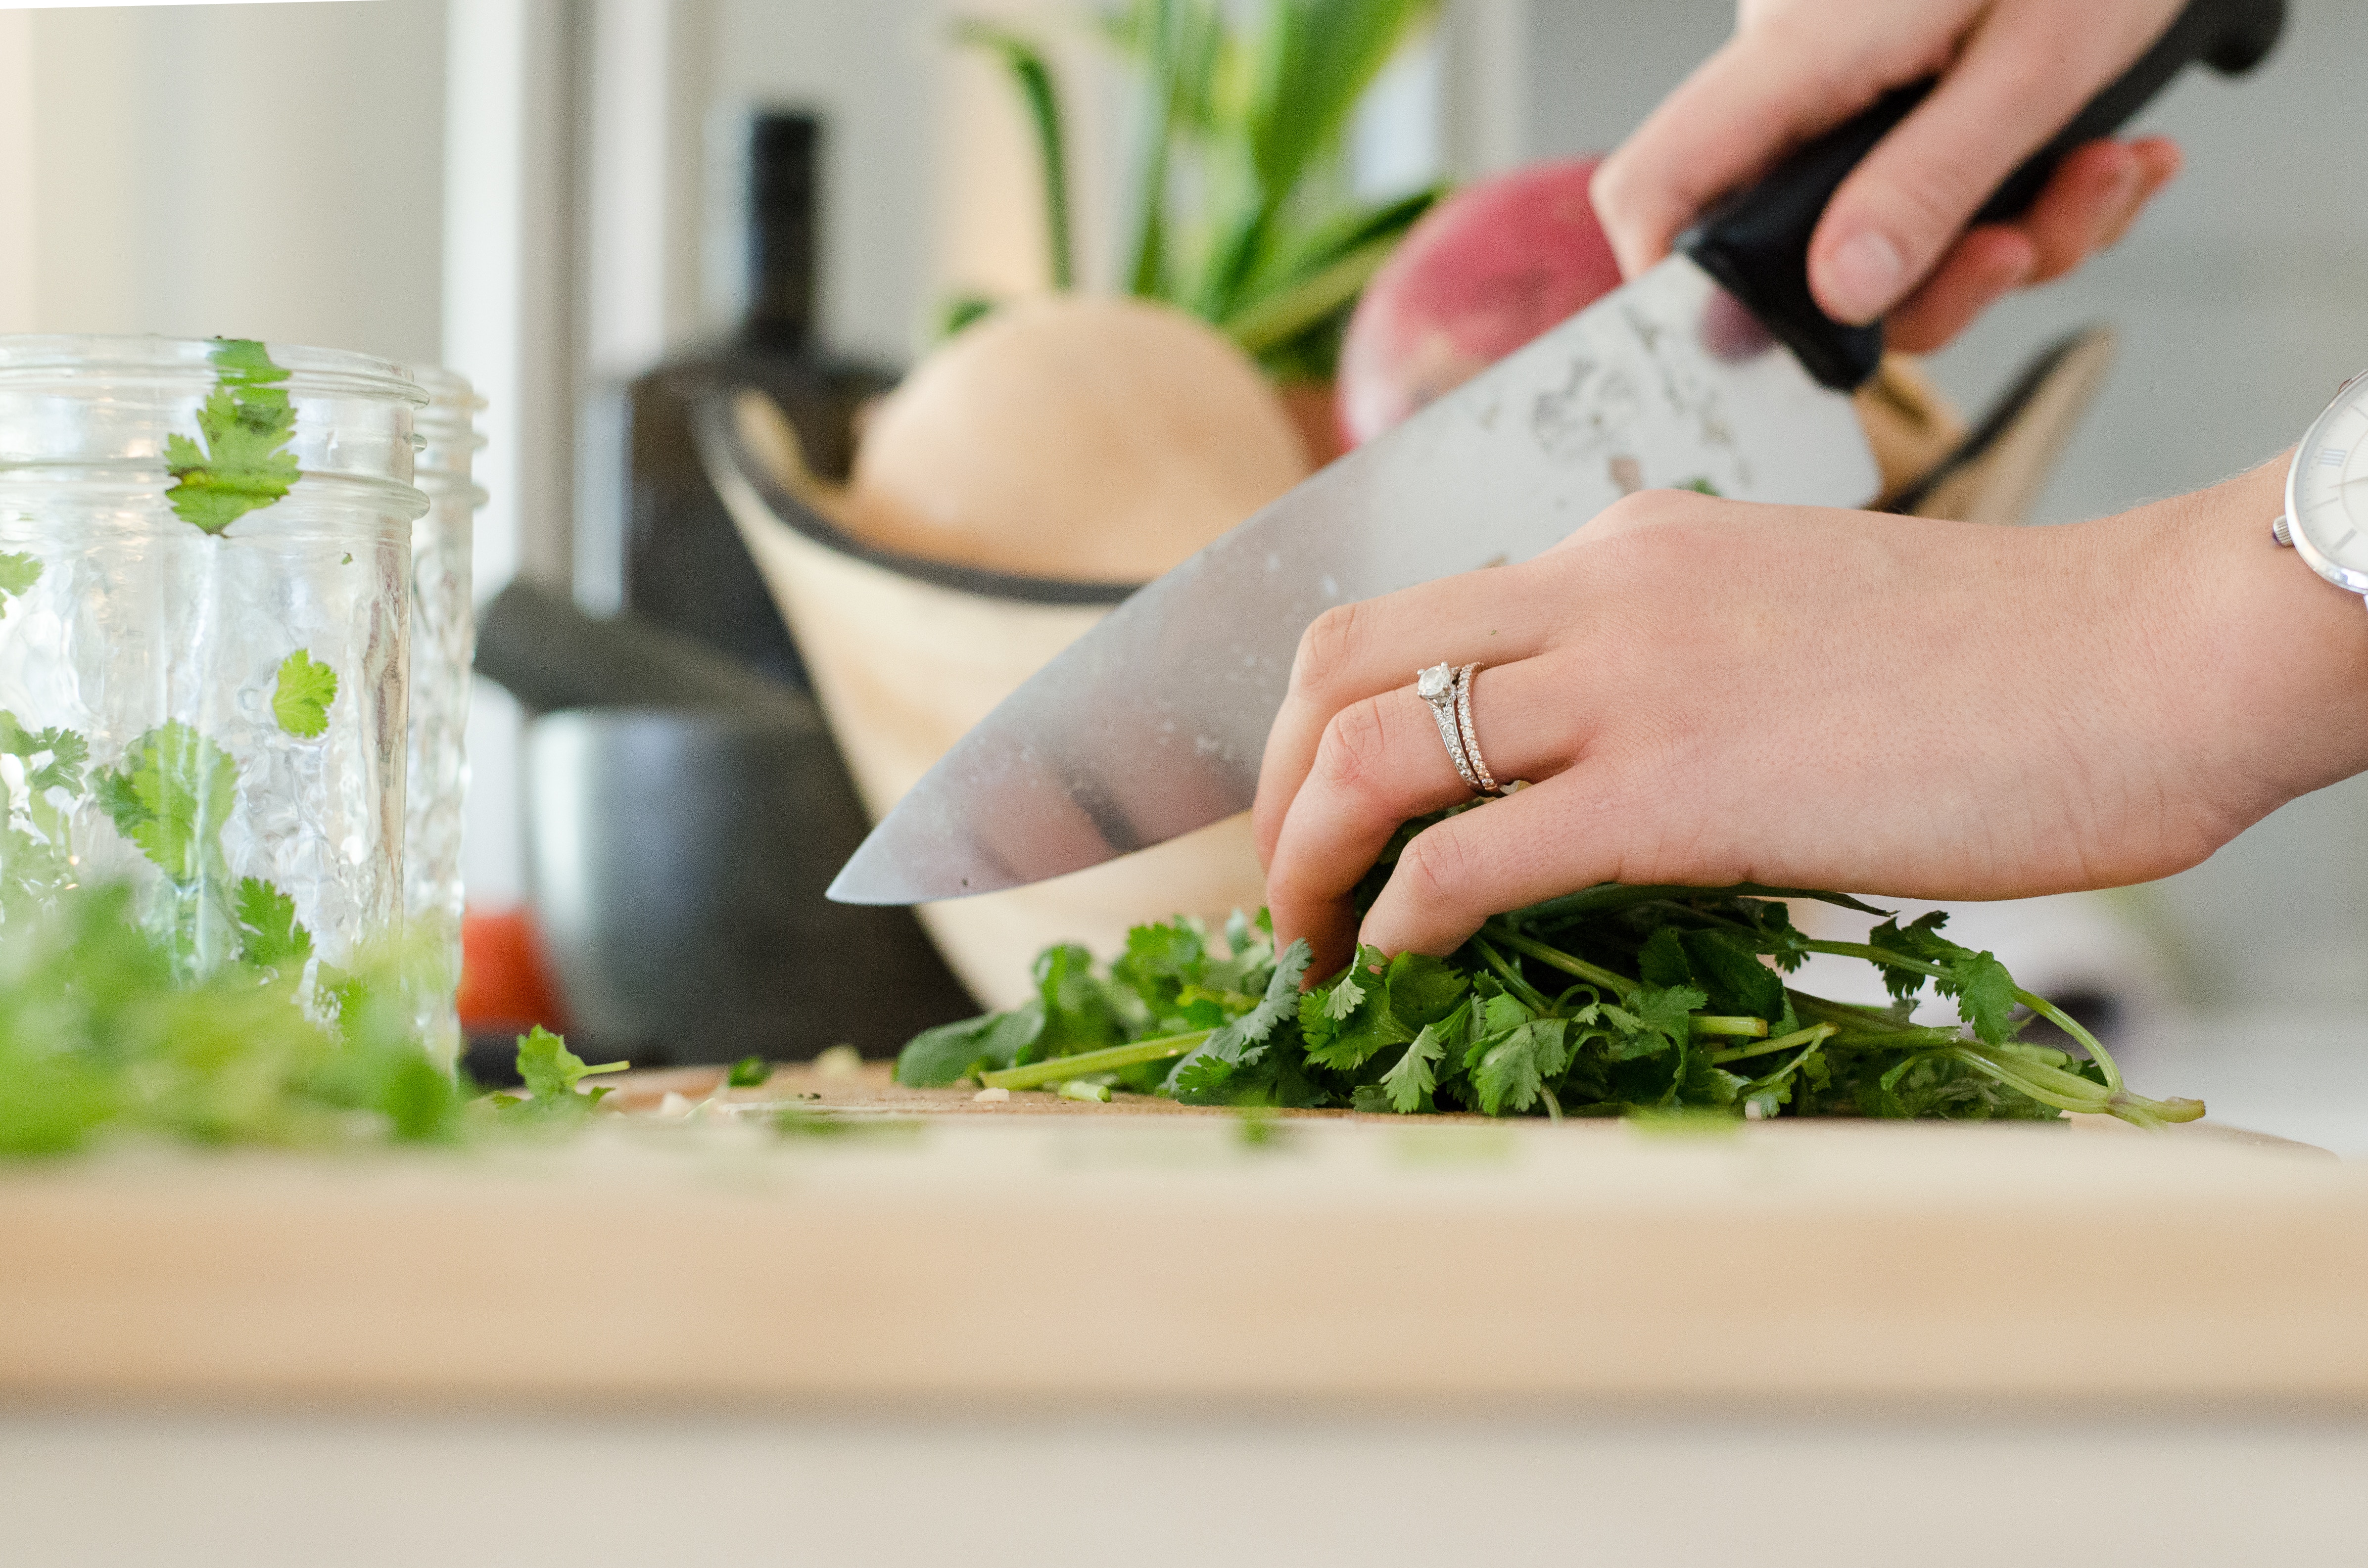 Hands of woman chopping herbs on cutting board